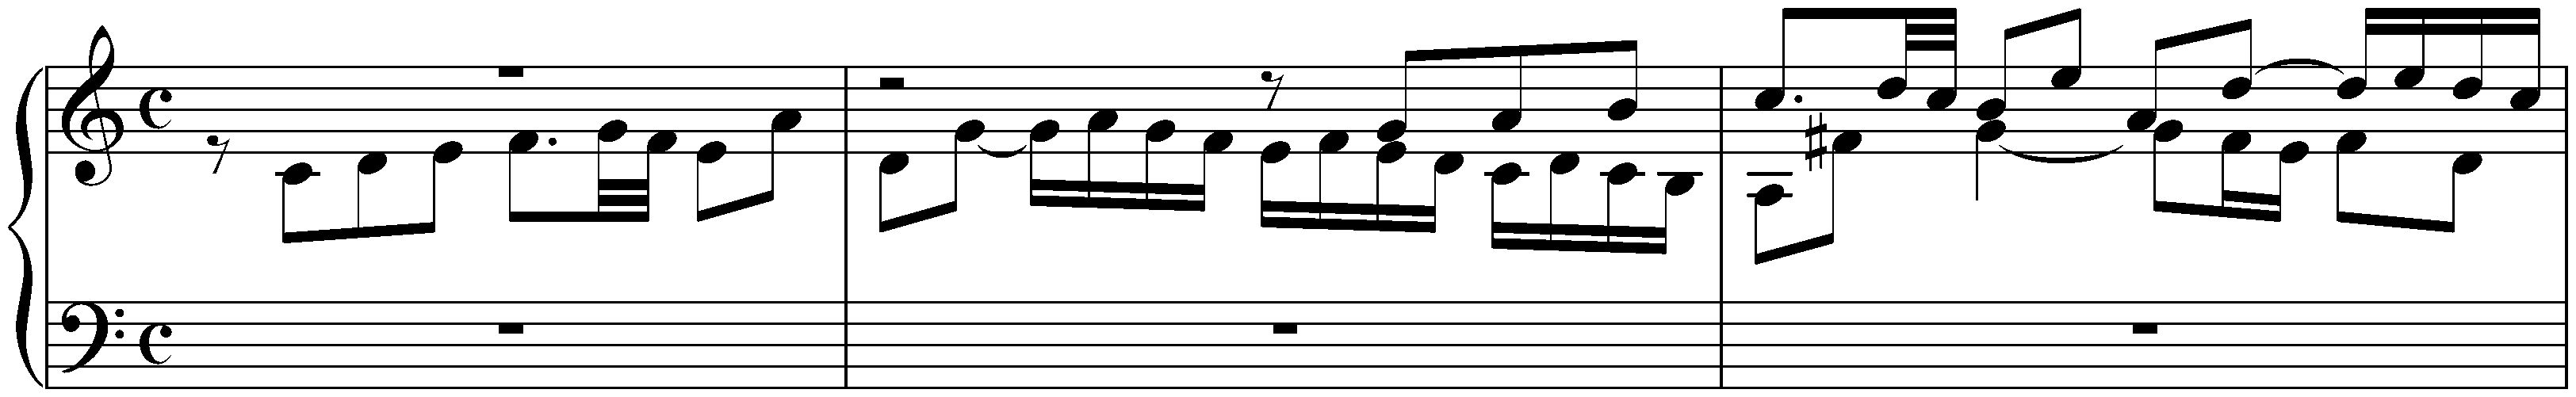 The Well-Tempered Clavier, Book 1, BWV 846–869; 1. C major, BWV 846, Fugue